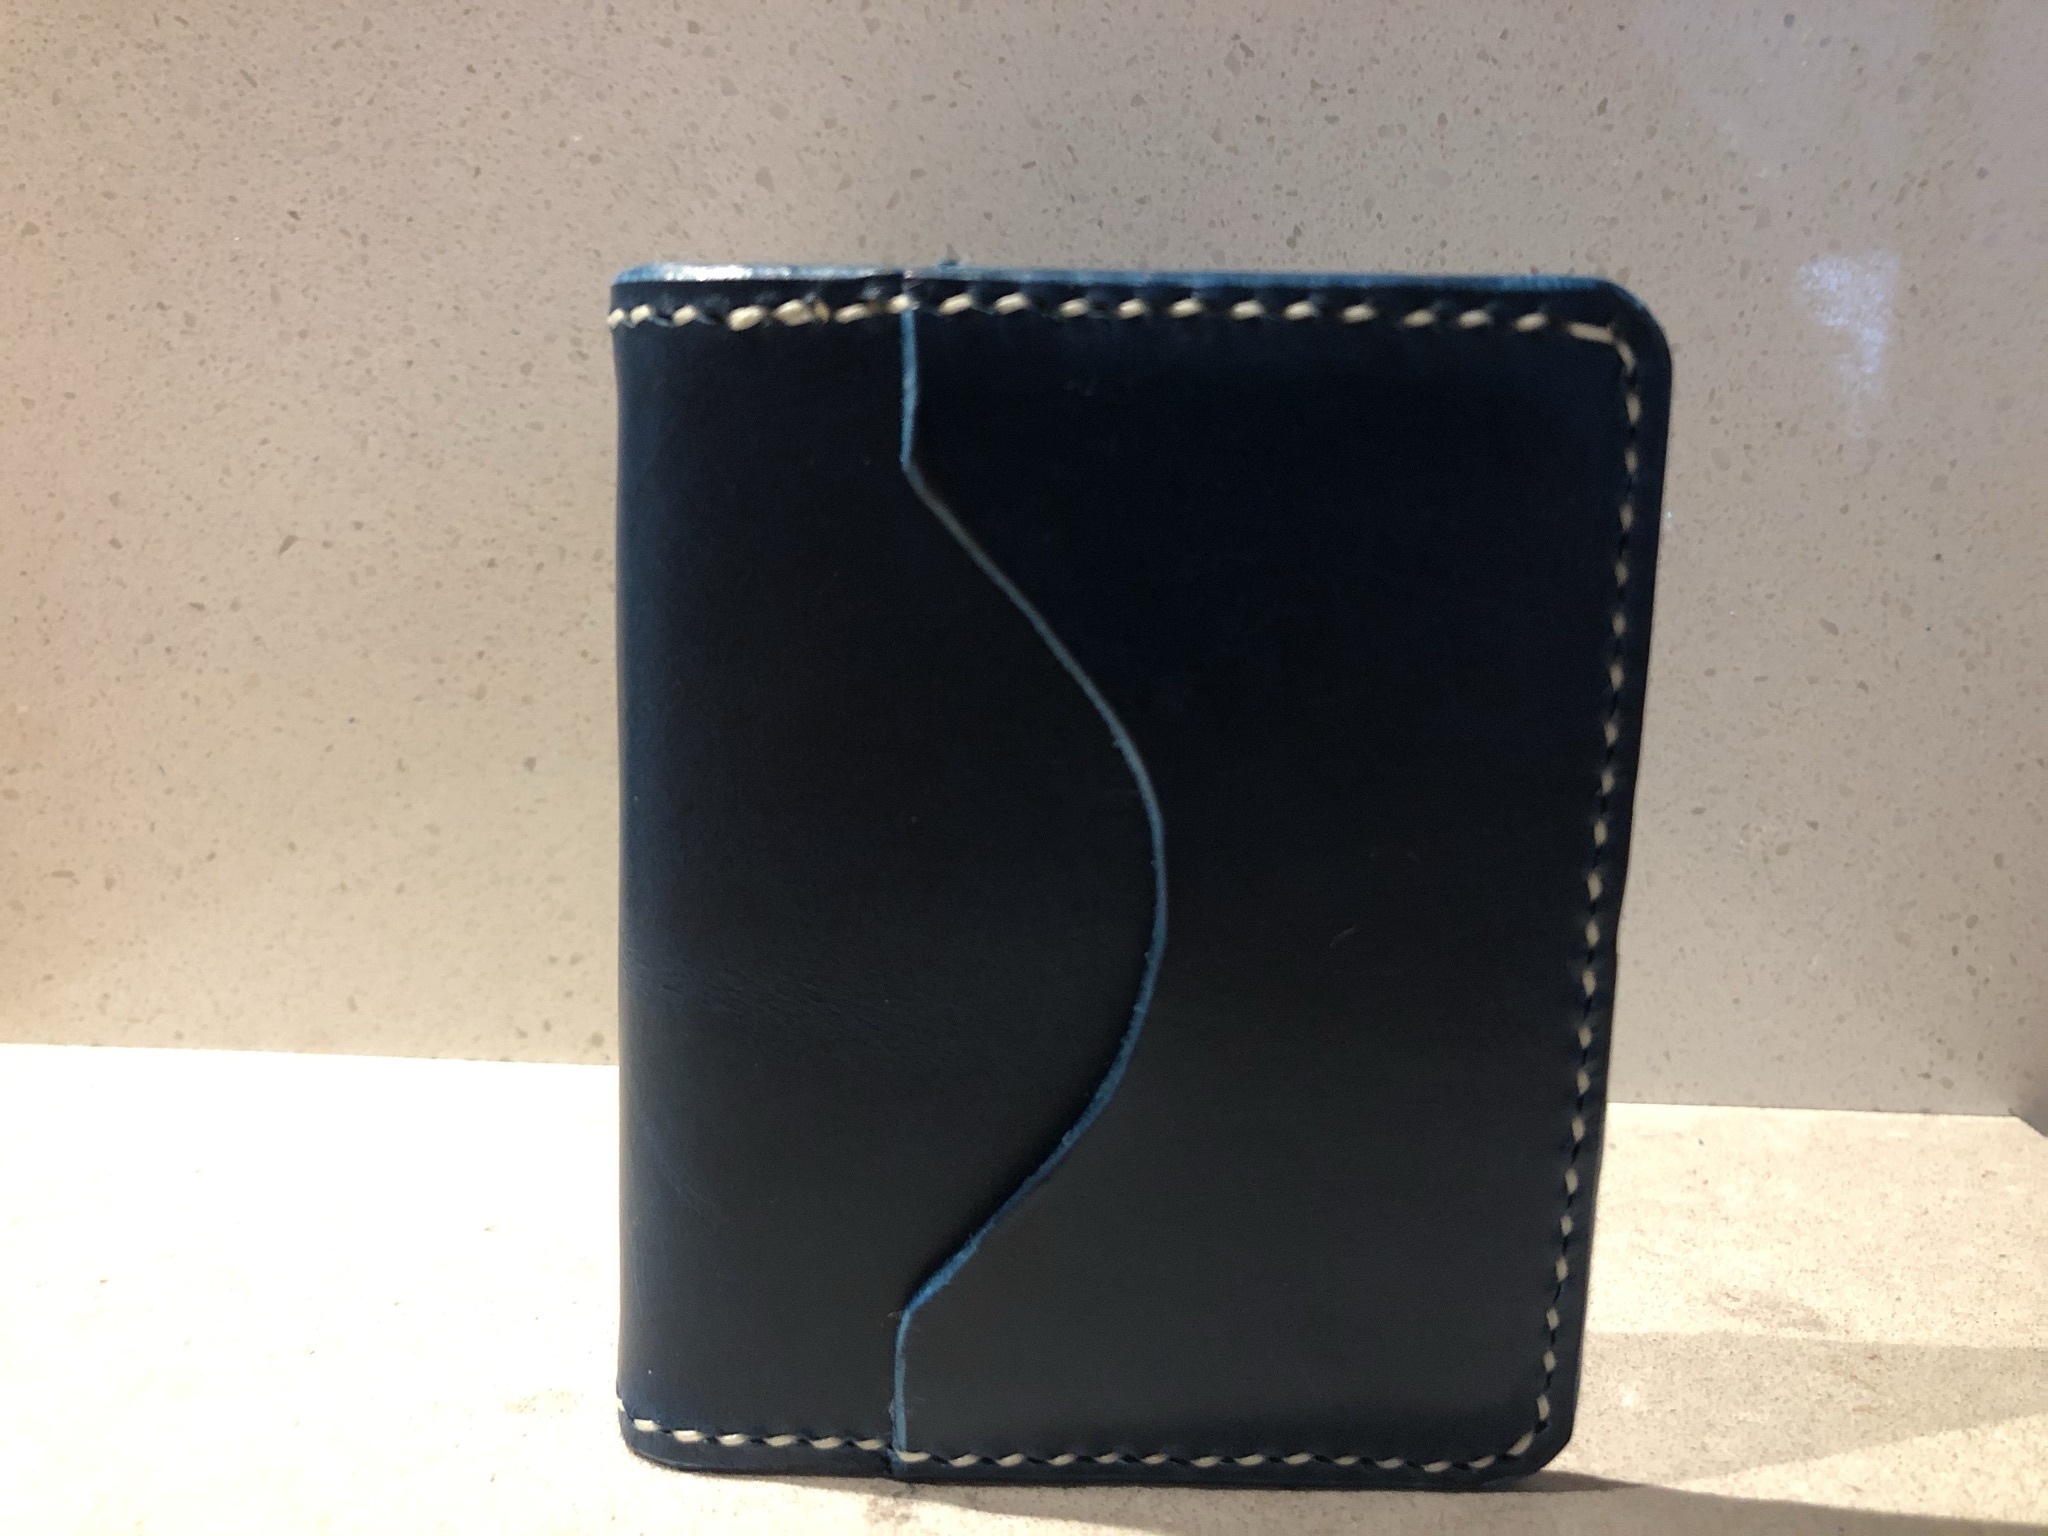 Blue Buttero Wallet in a standing position